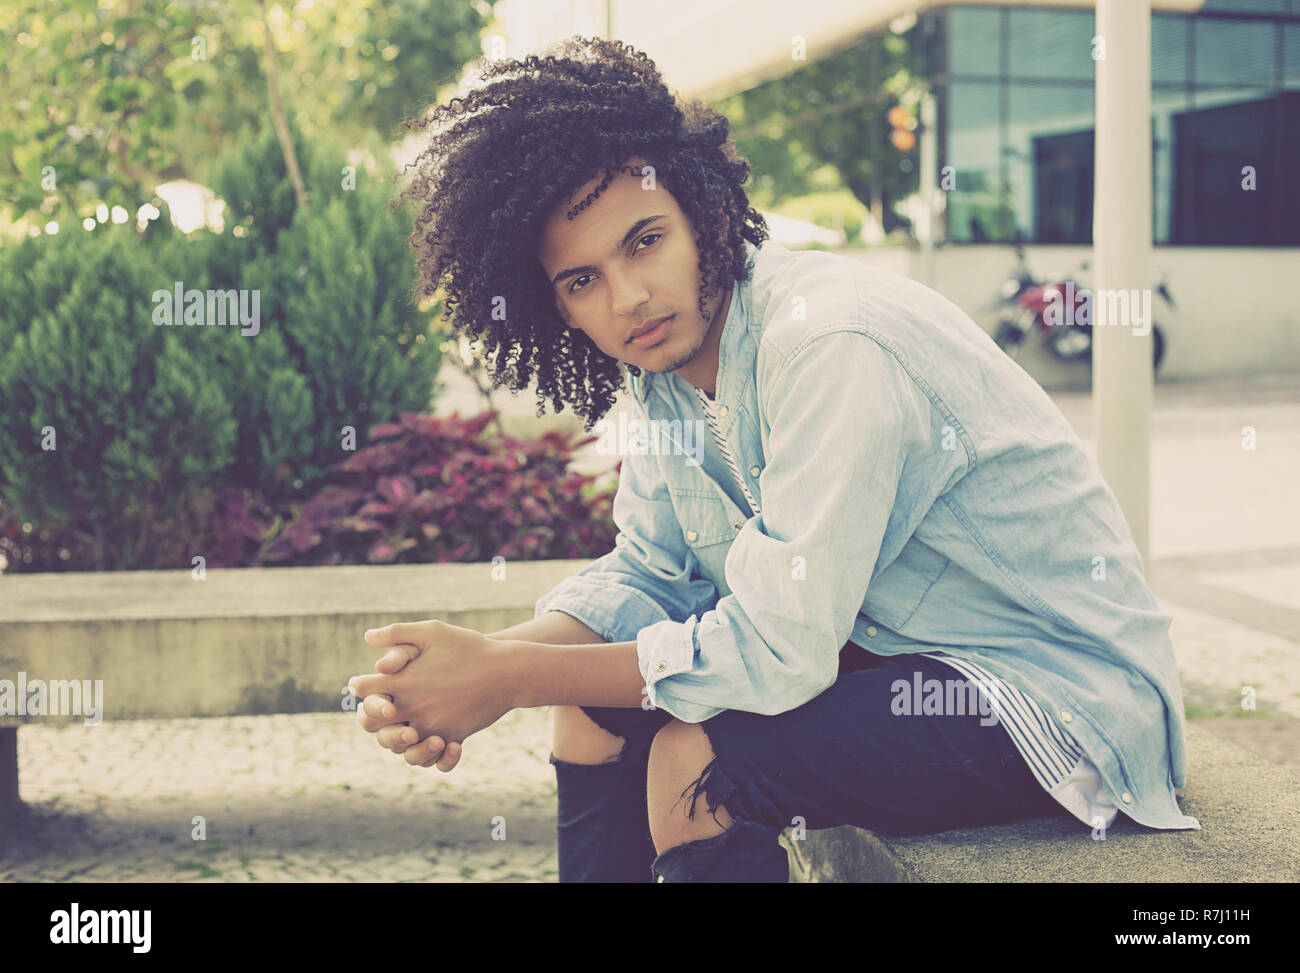 Fashionable young adult man with long curly hair outdoor in the city Stock Photo